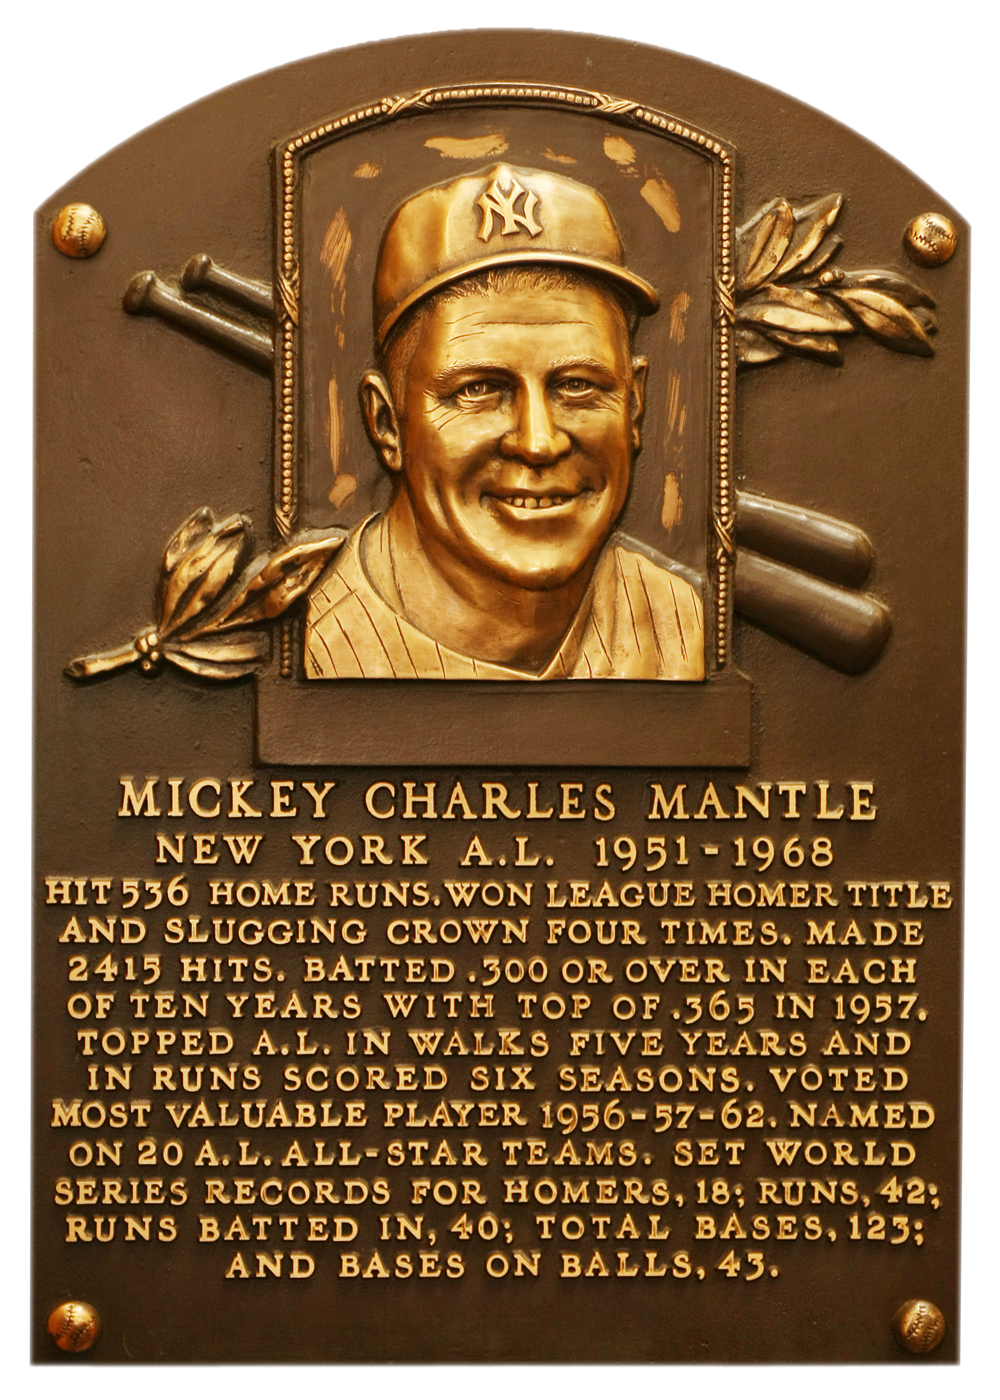 Mickey Mantle Hall of Fame plaque